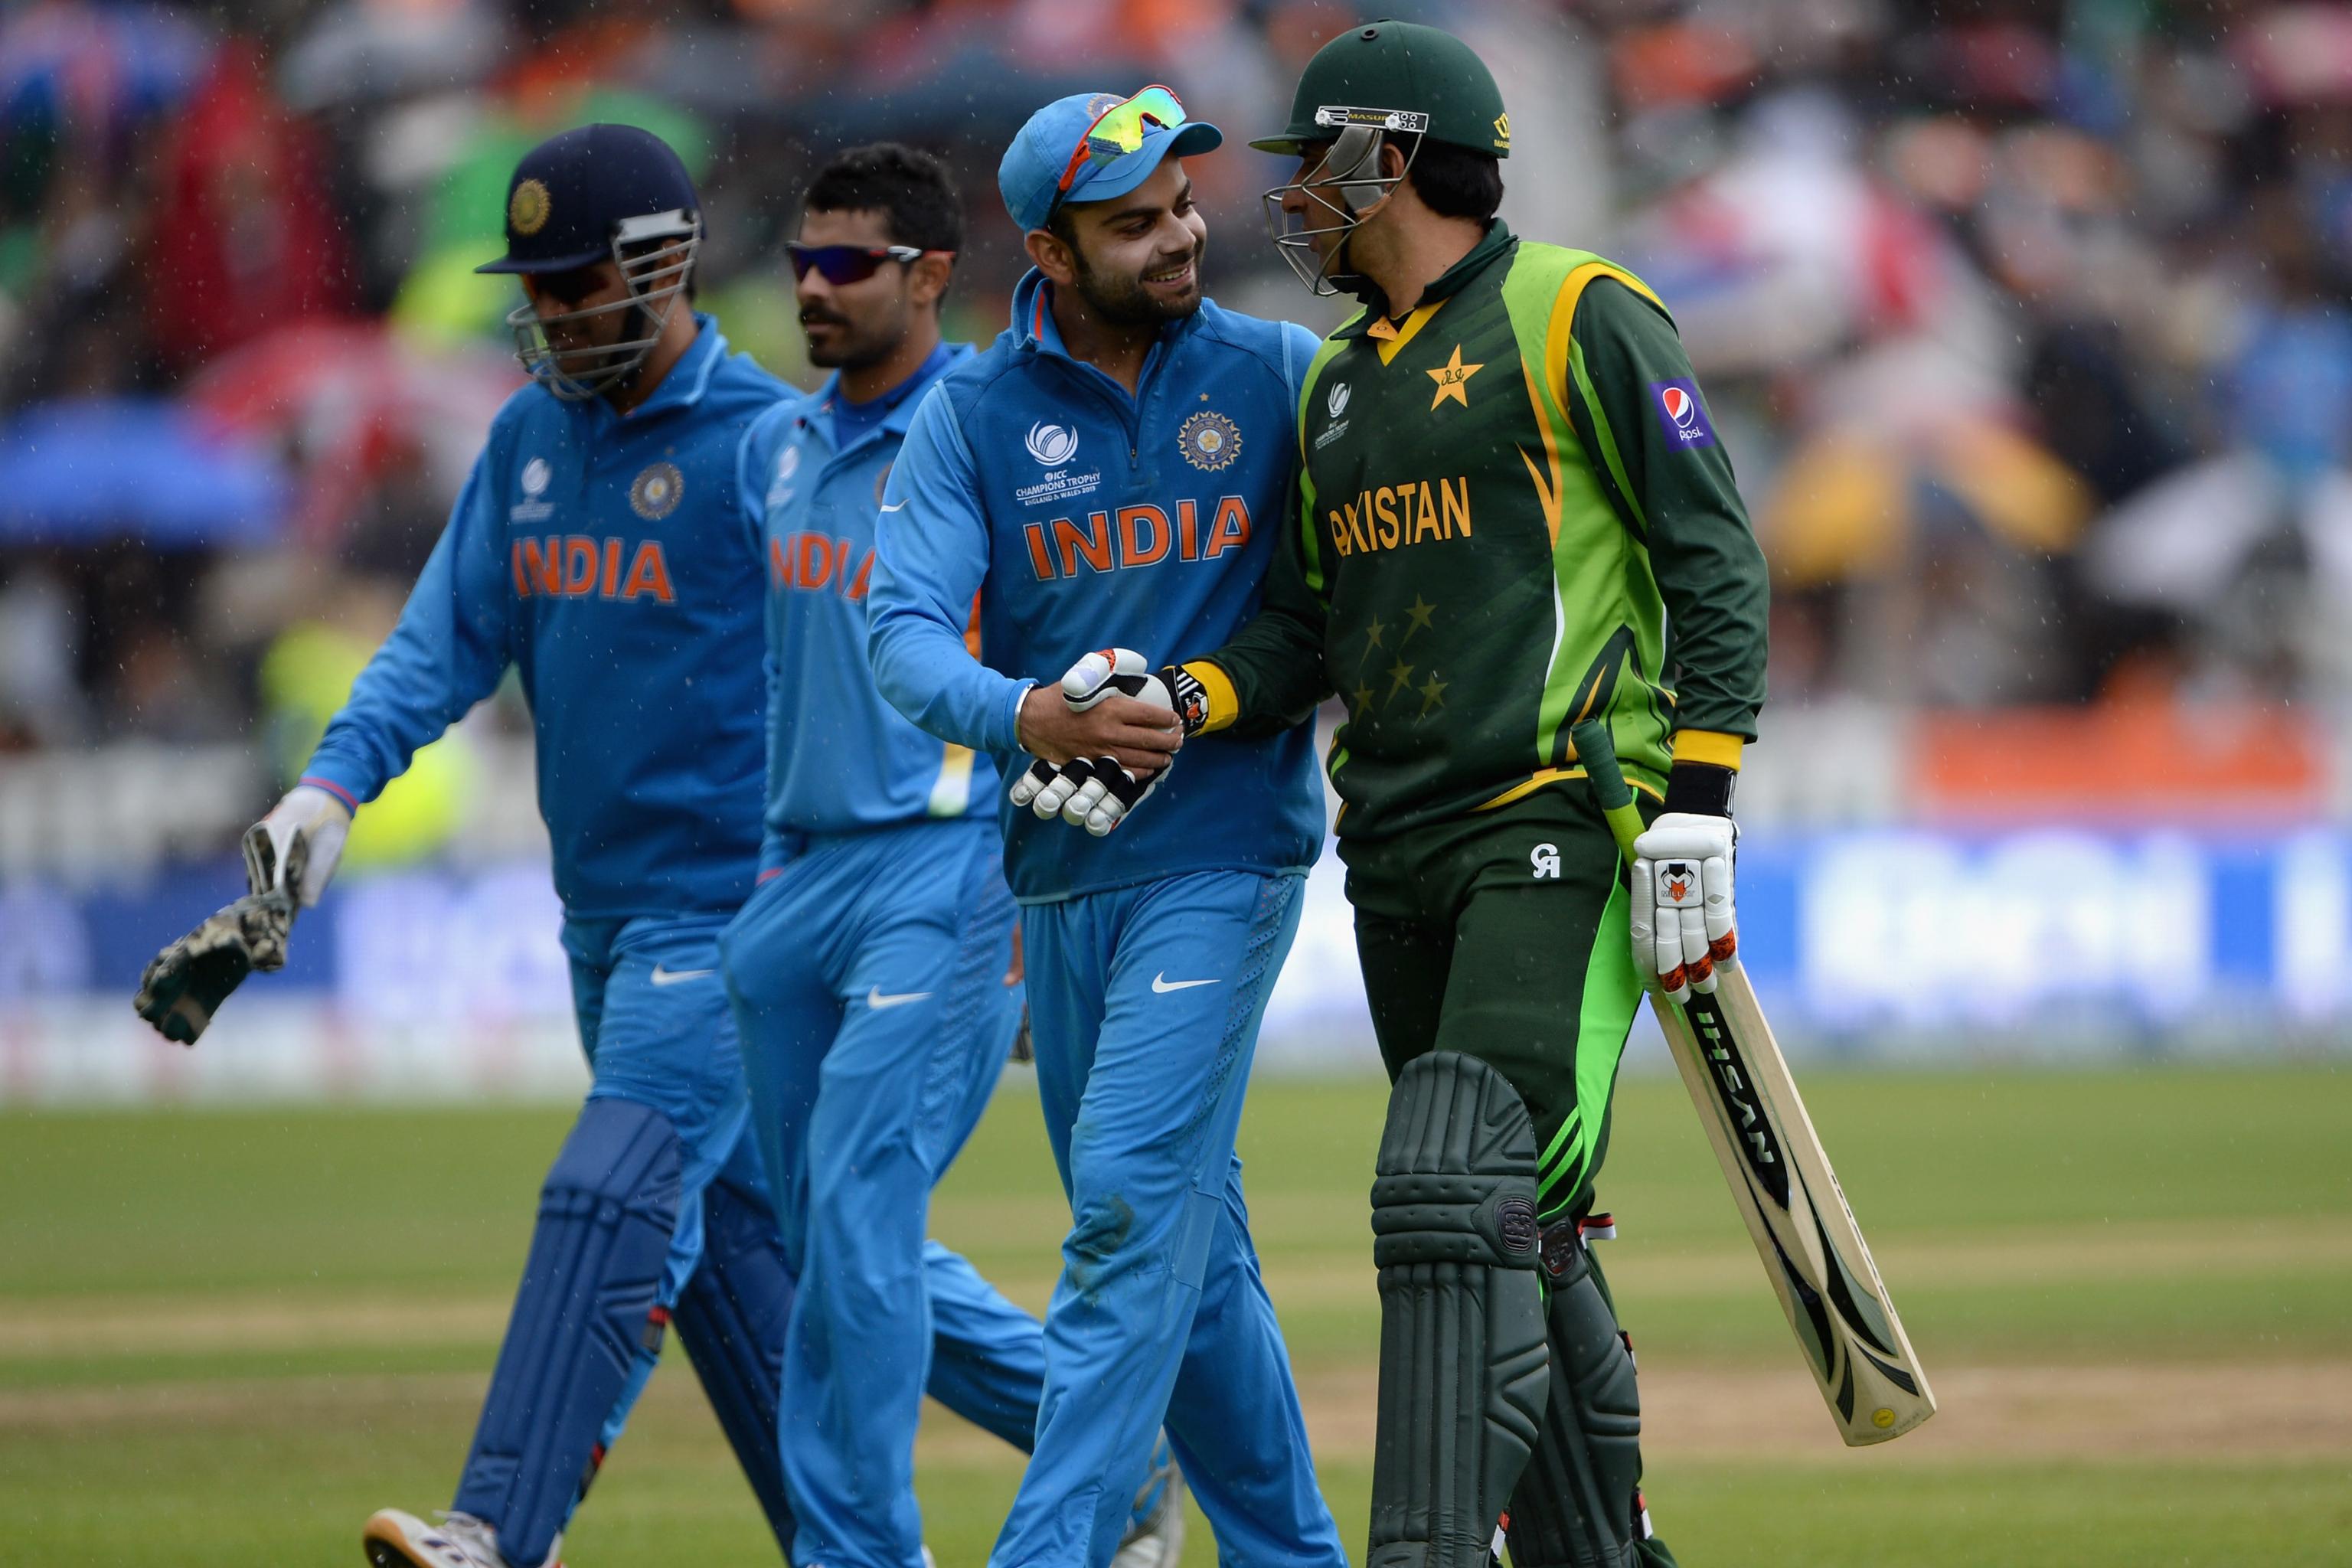 ICC Trophy 2013: India vs. Pakistan Score, Points Table and More | News, Highlights, Stats, and Rumors | Bleacher Report